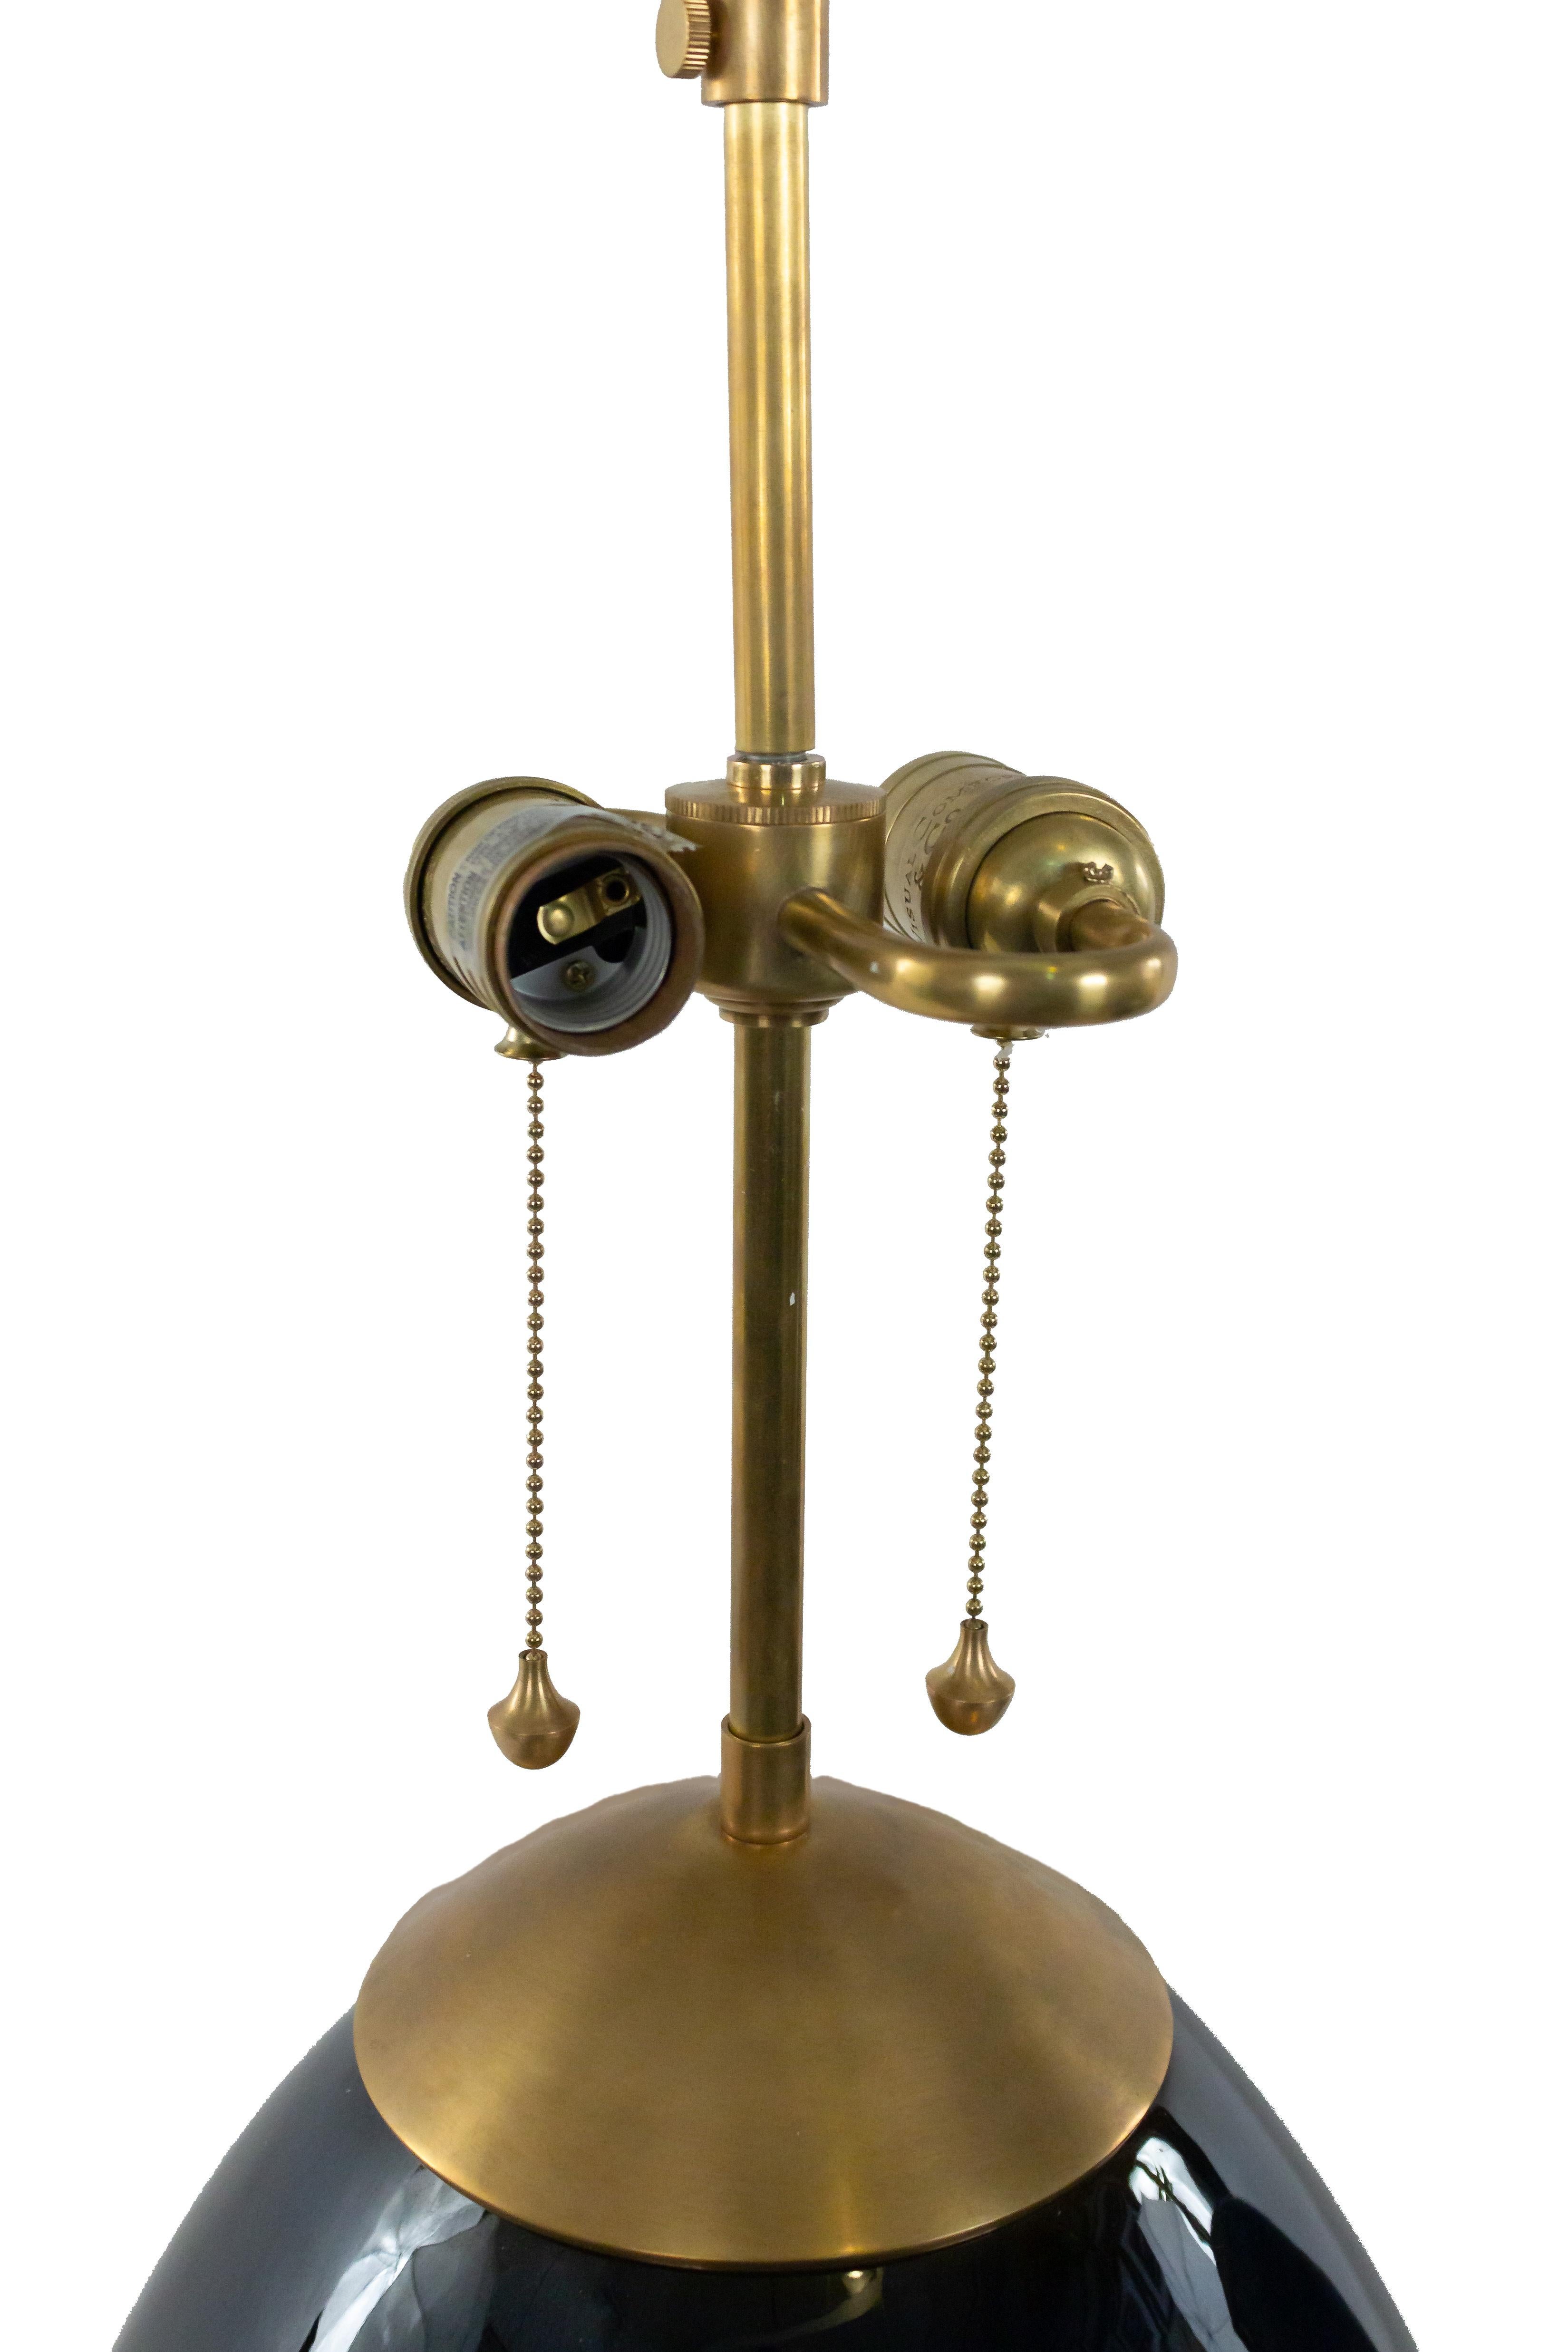 Contemporary navy bulb-shaped ceramic lamp with antique brass square base and hardware. (Contemporary Wiring).
 